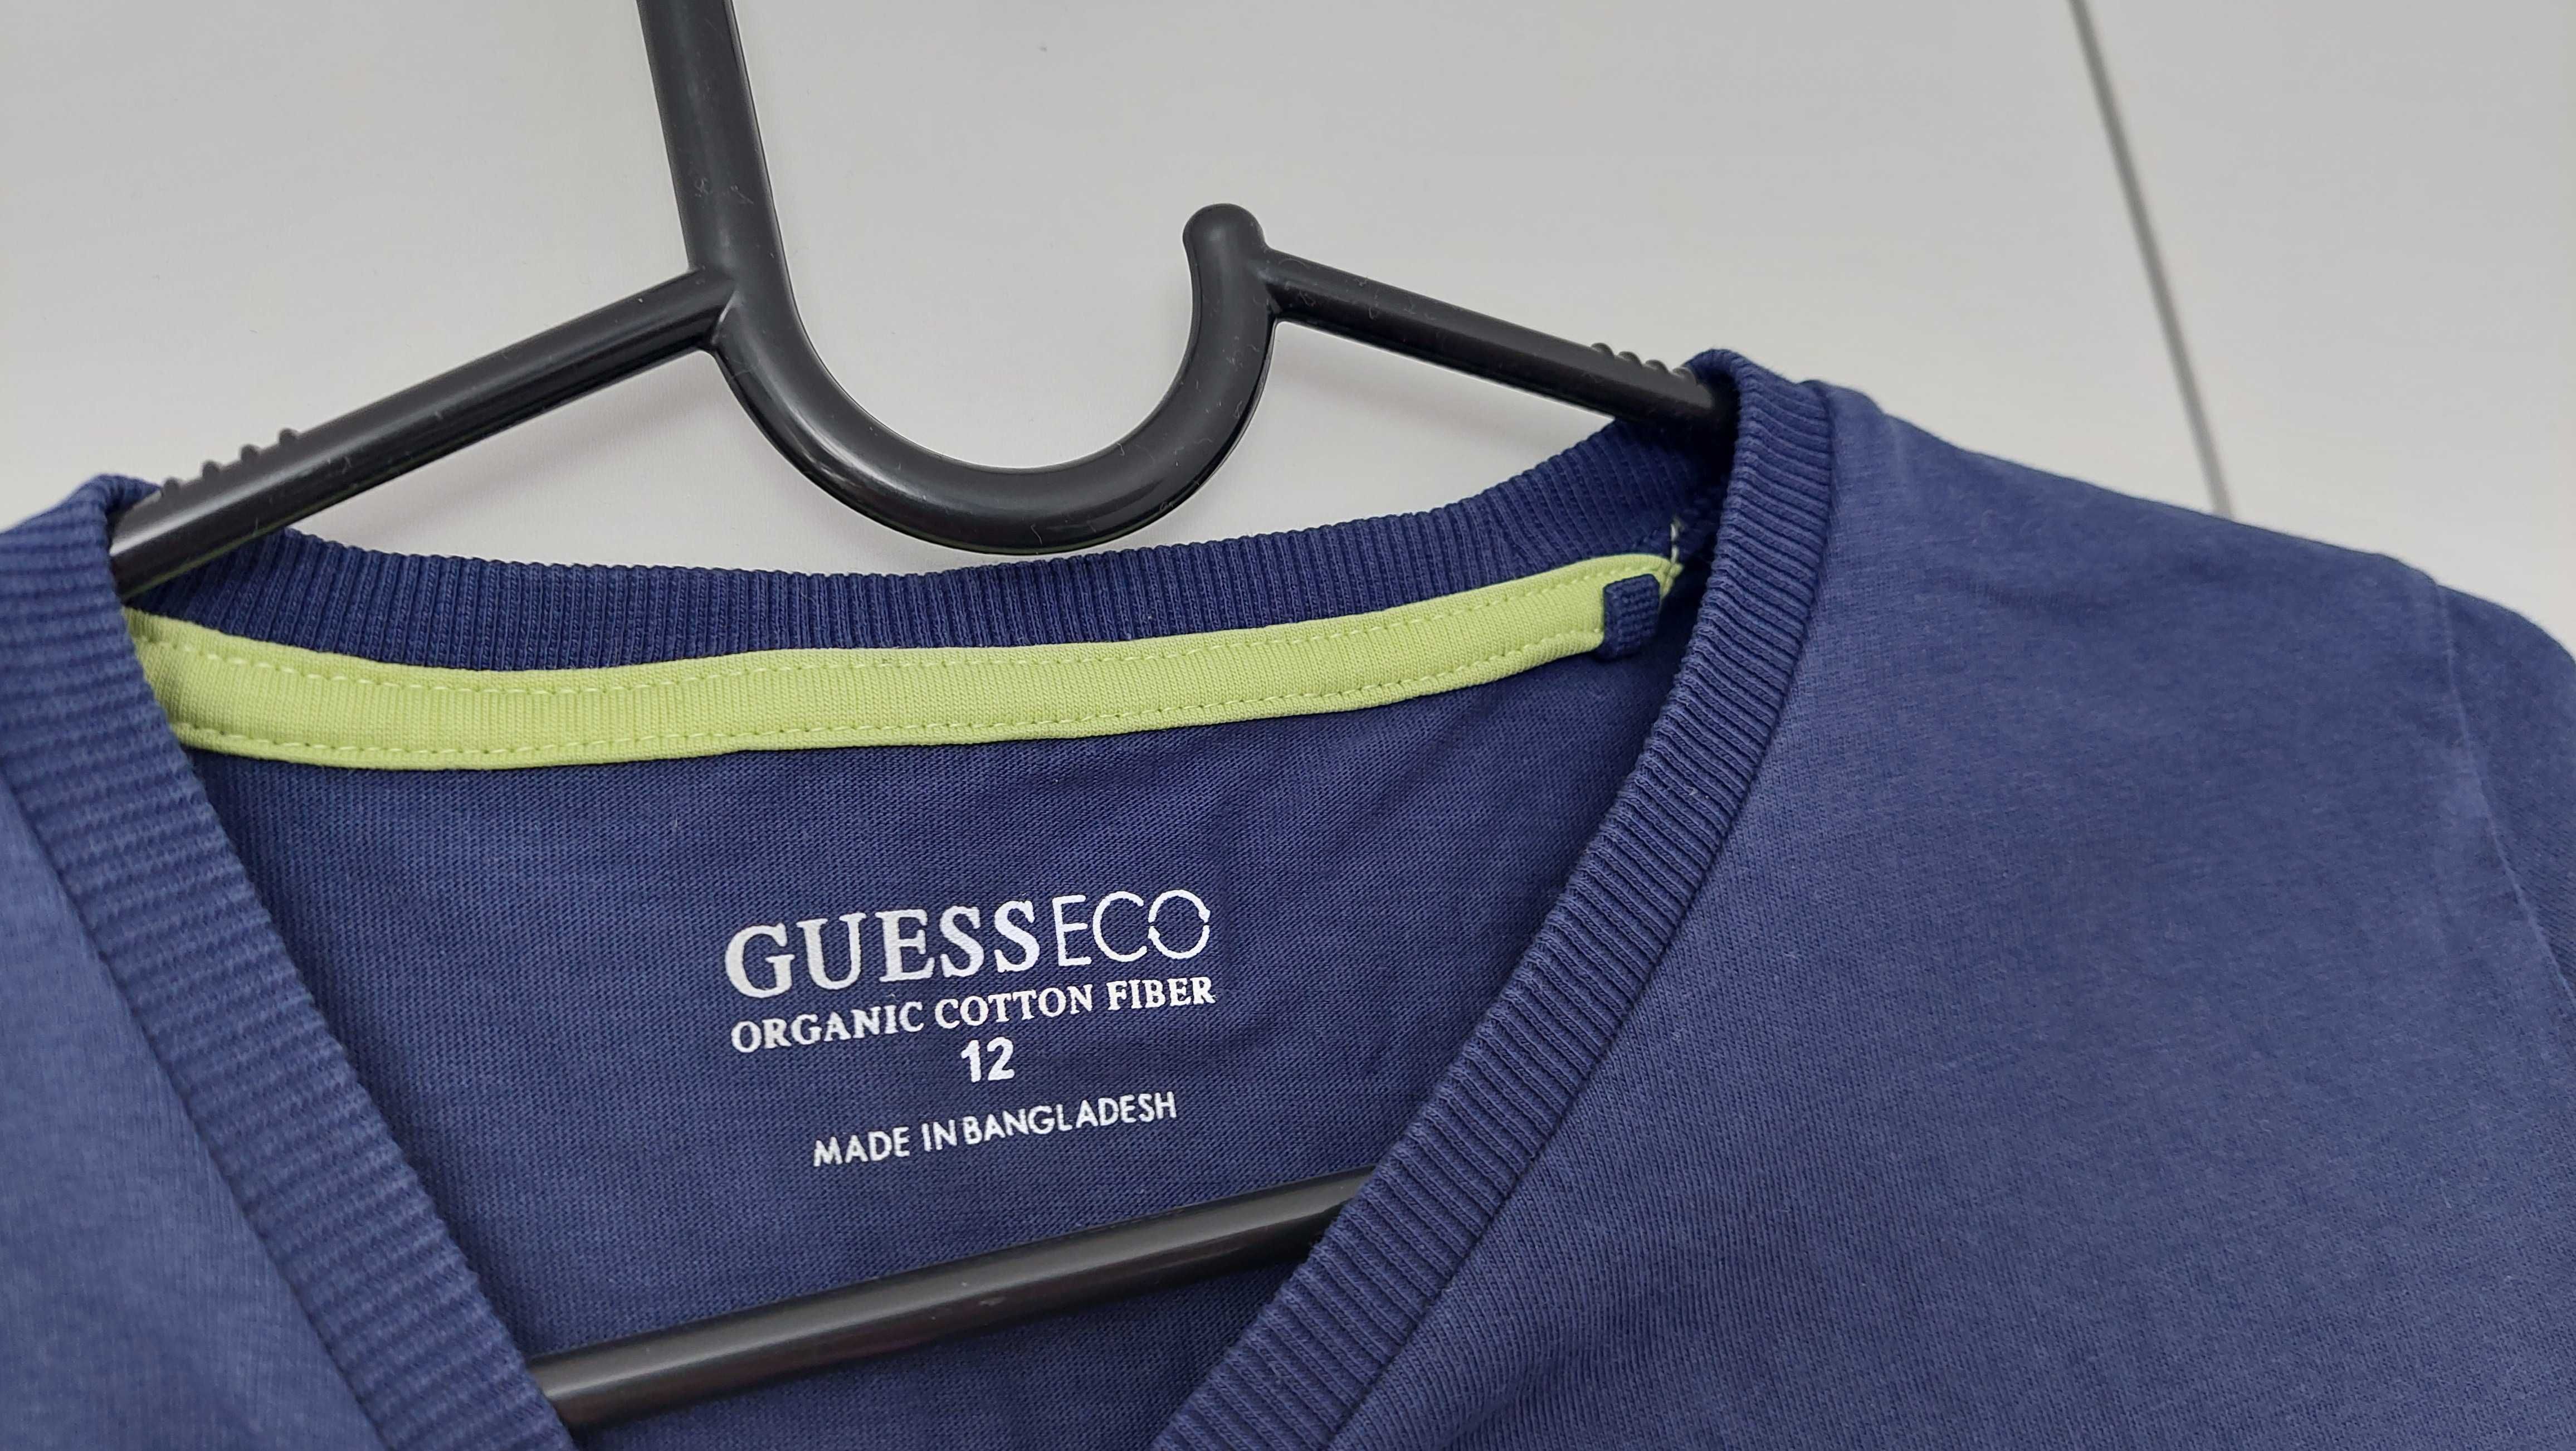 Vand tricou Guess